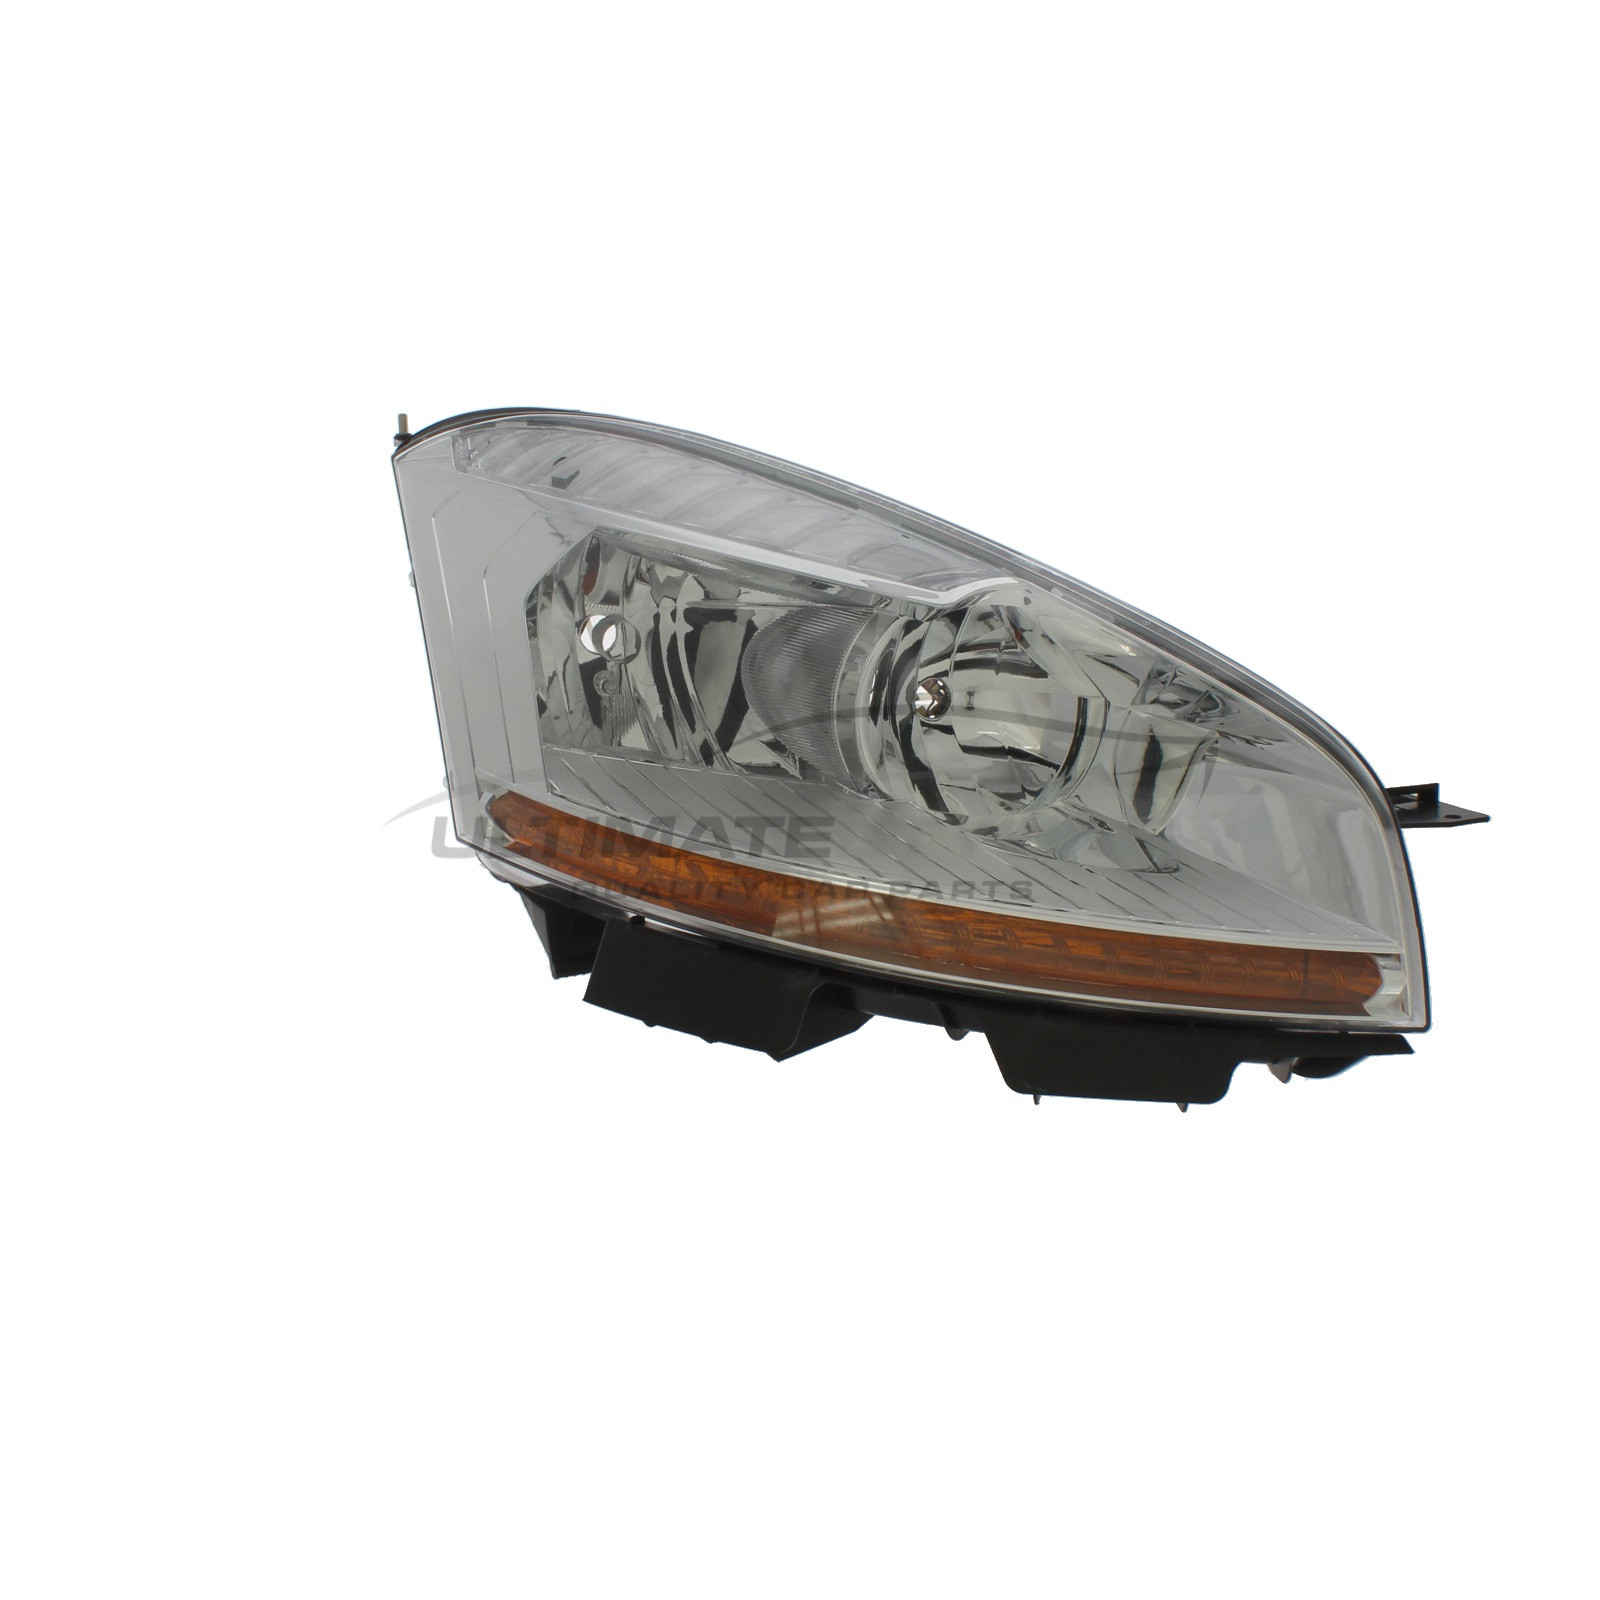 Citroen C4 Picasso 2006-2011, C4 Grand Picasso 2006-2011 Halogen, Electric With Motor, Chrome Headlight / Headlamp Including Amber Indicator Drivers Side (RH)